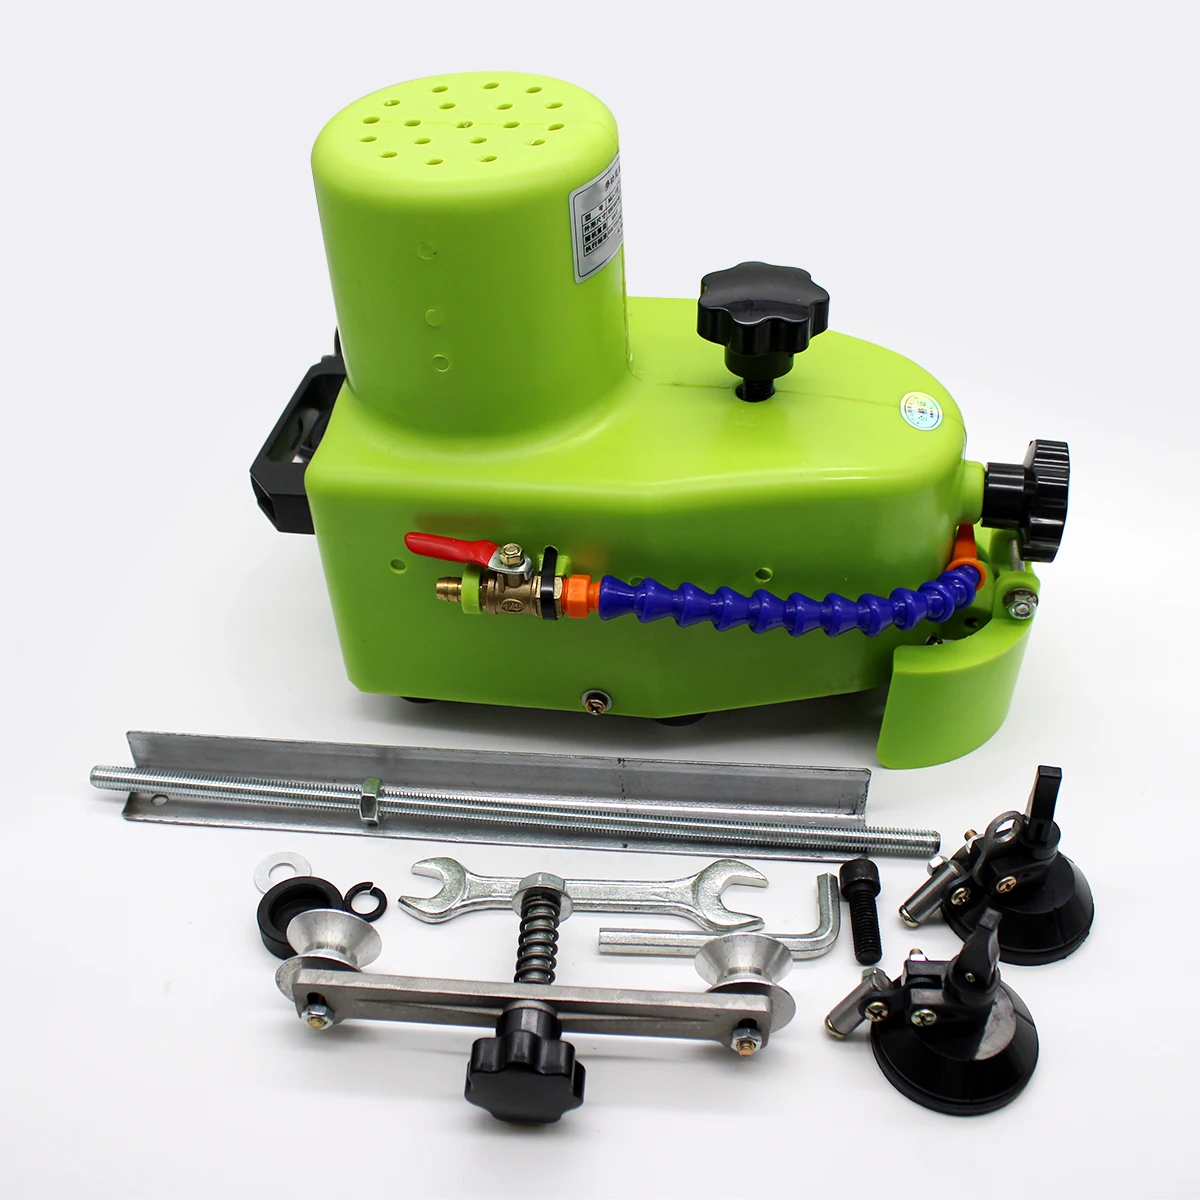 

Small portable glass grinding machine can grinding glass straight edge, round edge,hypotenuse tile edging machine 110V/220V